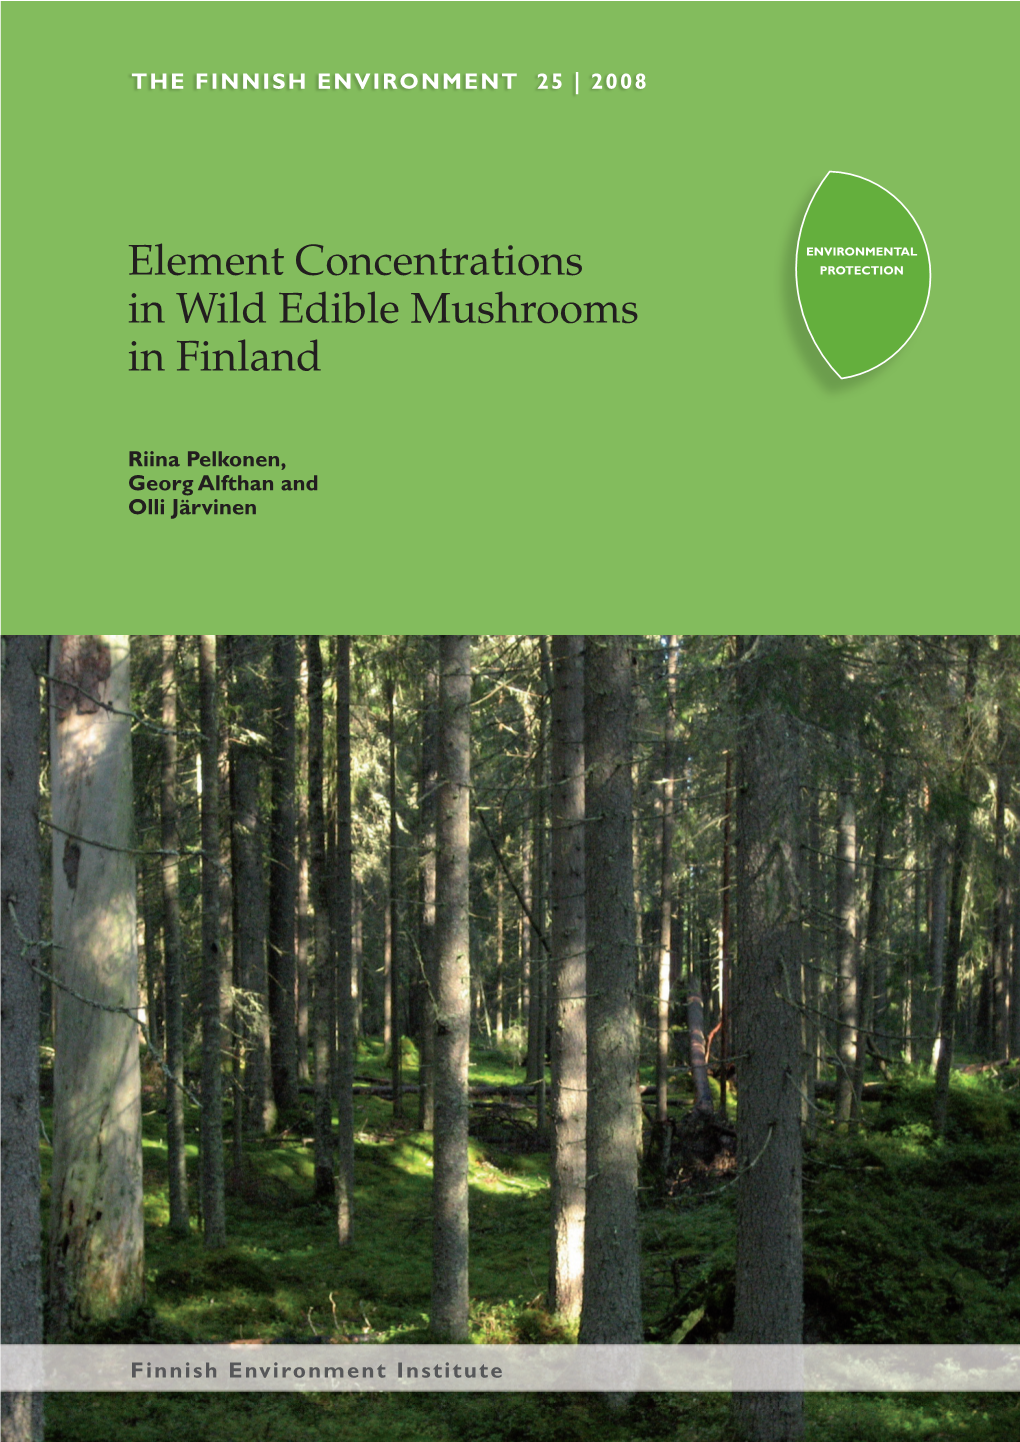 Element Concentrations in Wild Edible Mushrooms in Finland